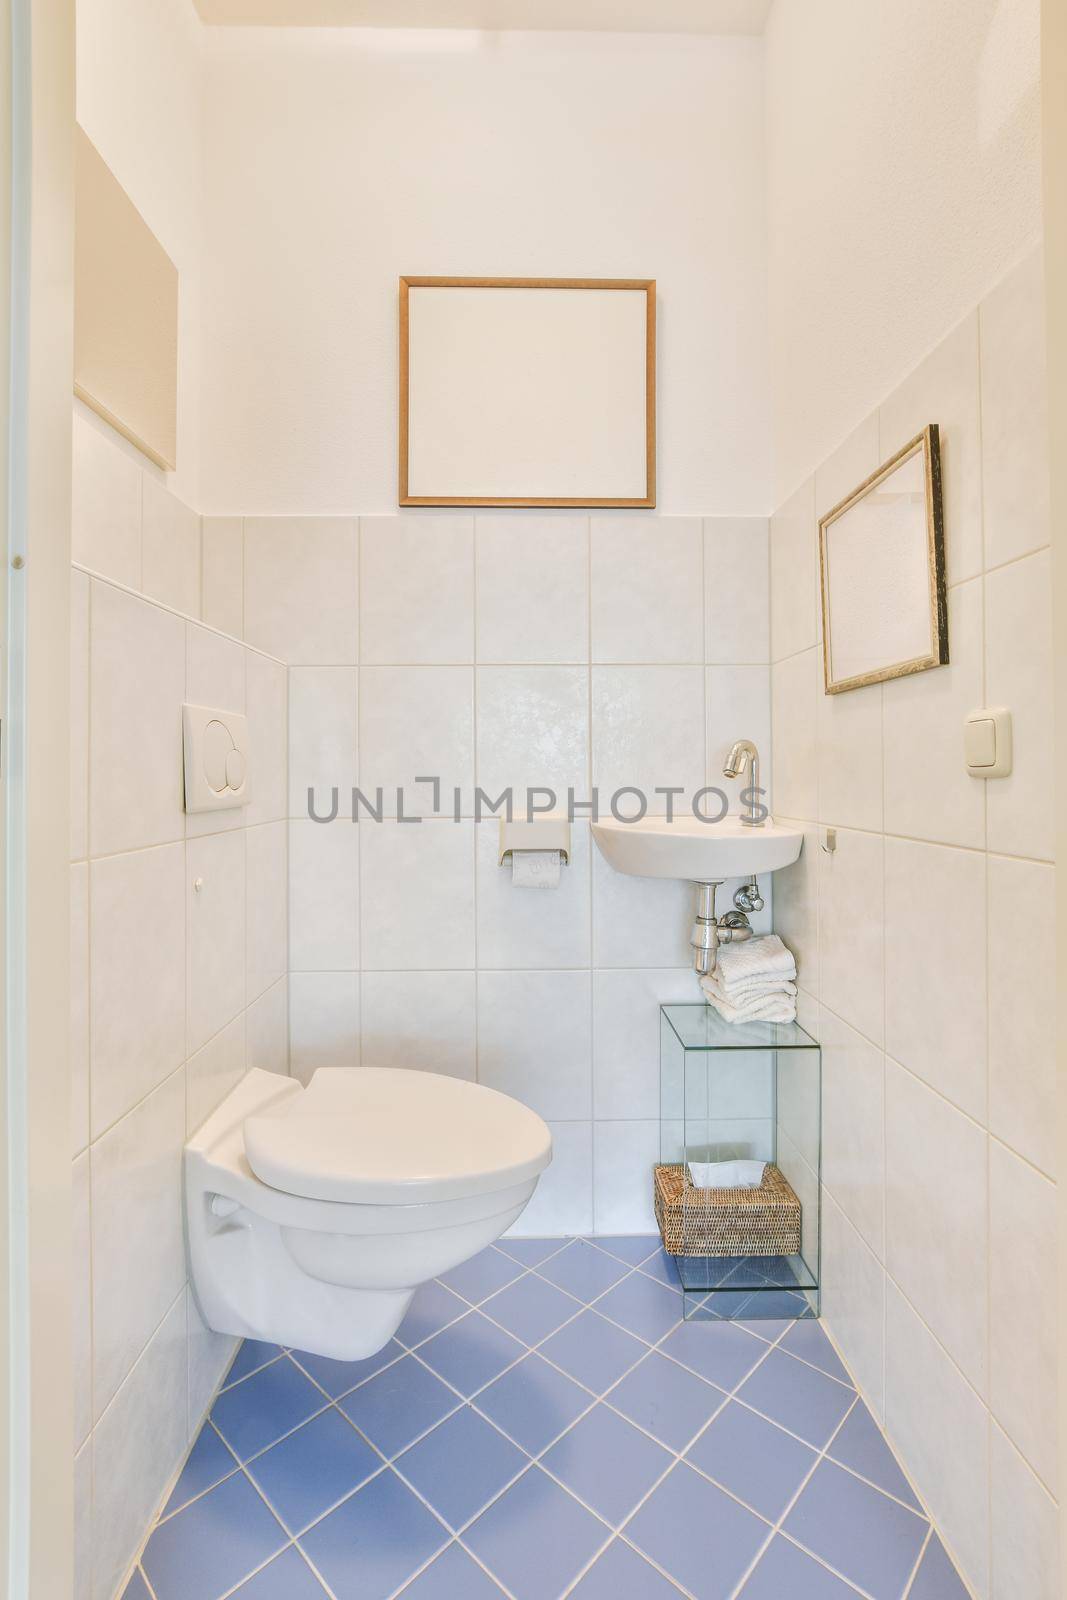 Bathroom interior with white and blue tiles and ceramic sink and hinged toilet in a modern apartment